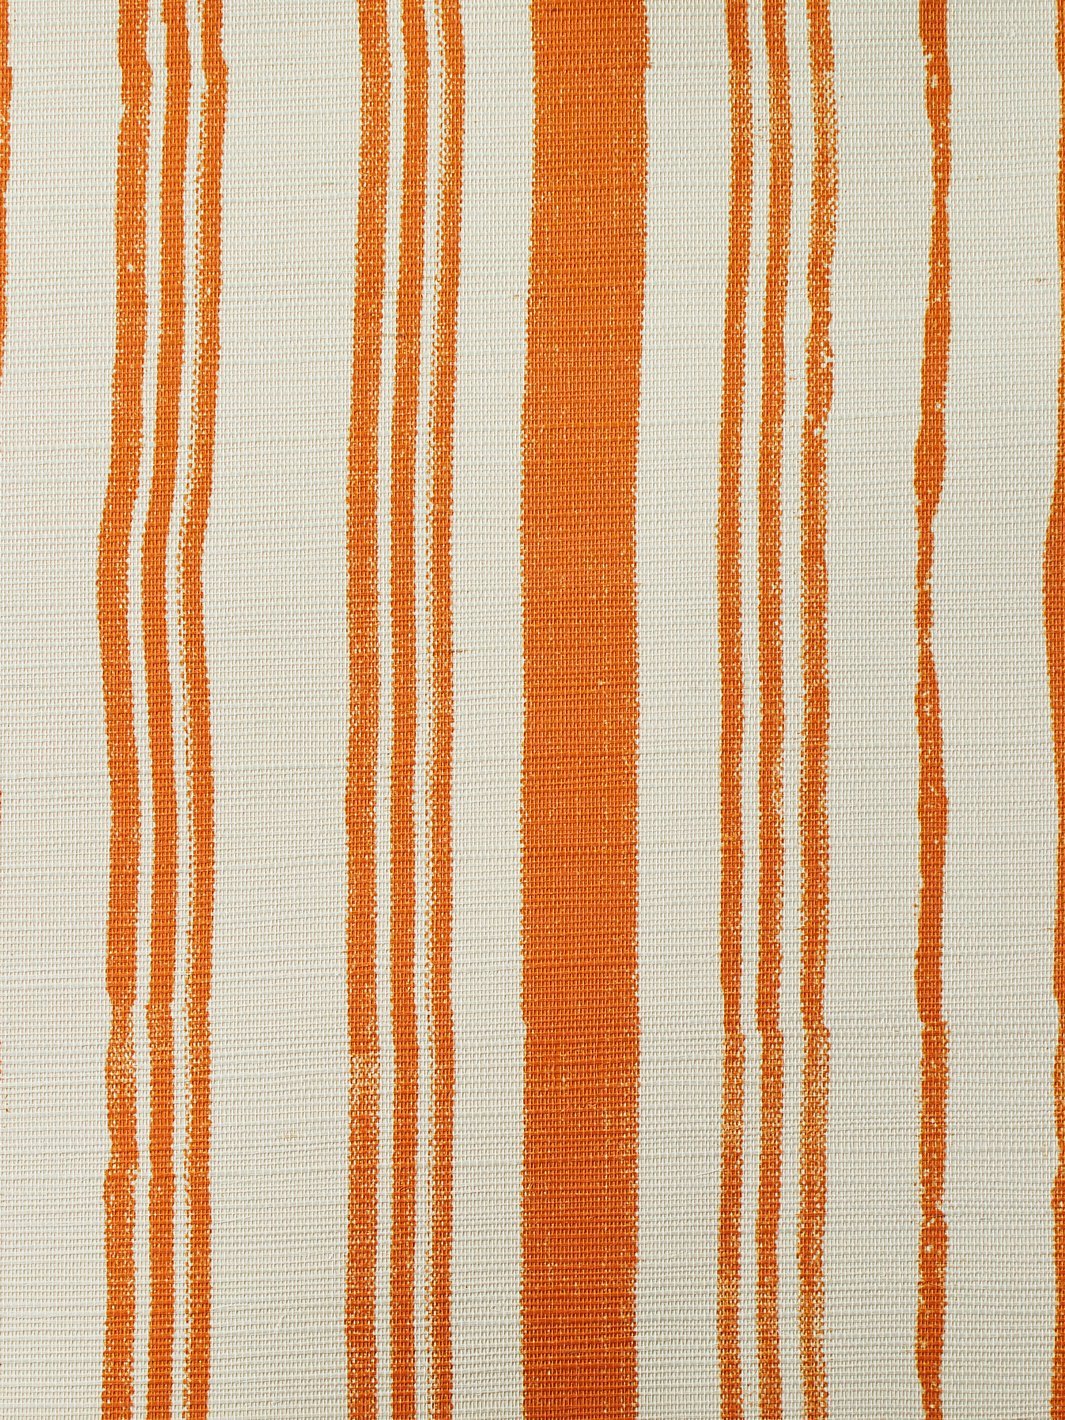 'Painted Stripes' Grasscloth' Wallpaper by Nathan Turner - Terracotta